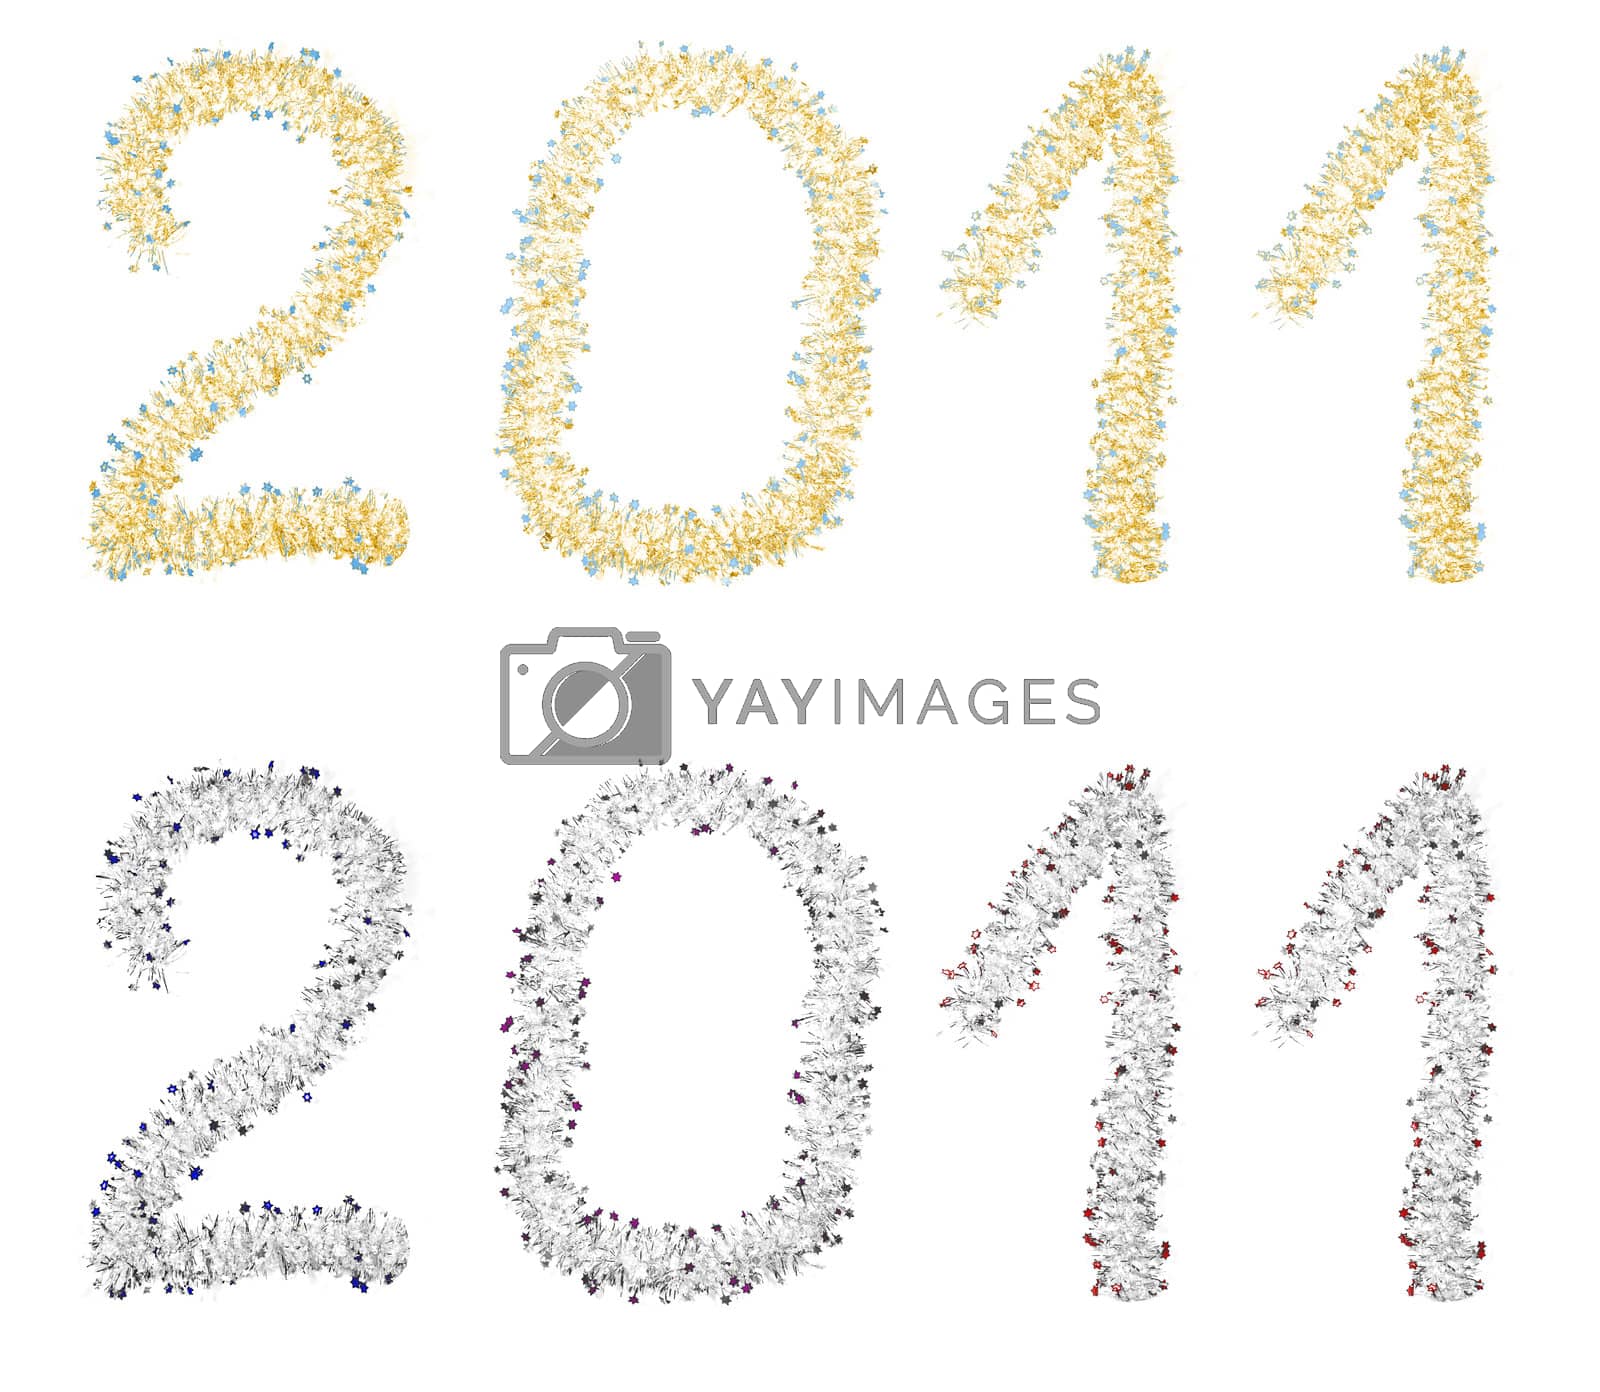 Royalty free image of 2011 made of garlands by gitusik